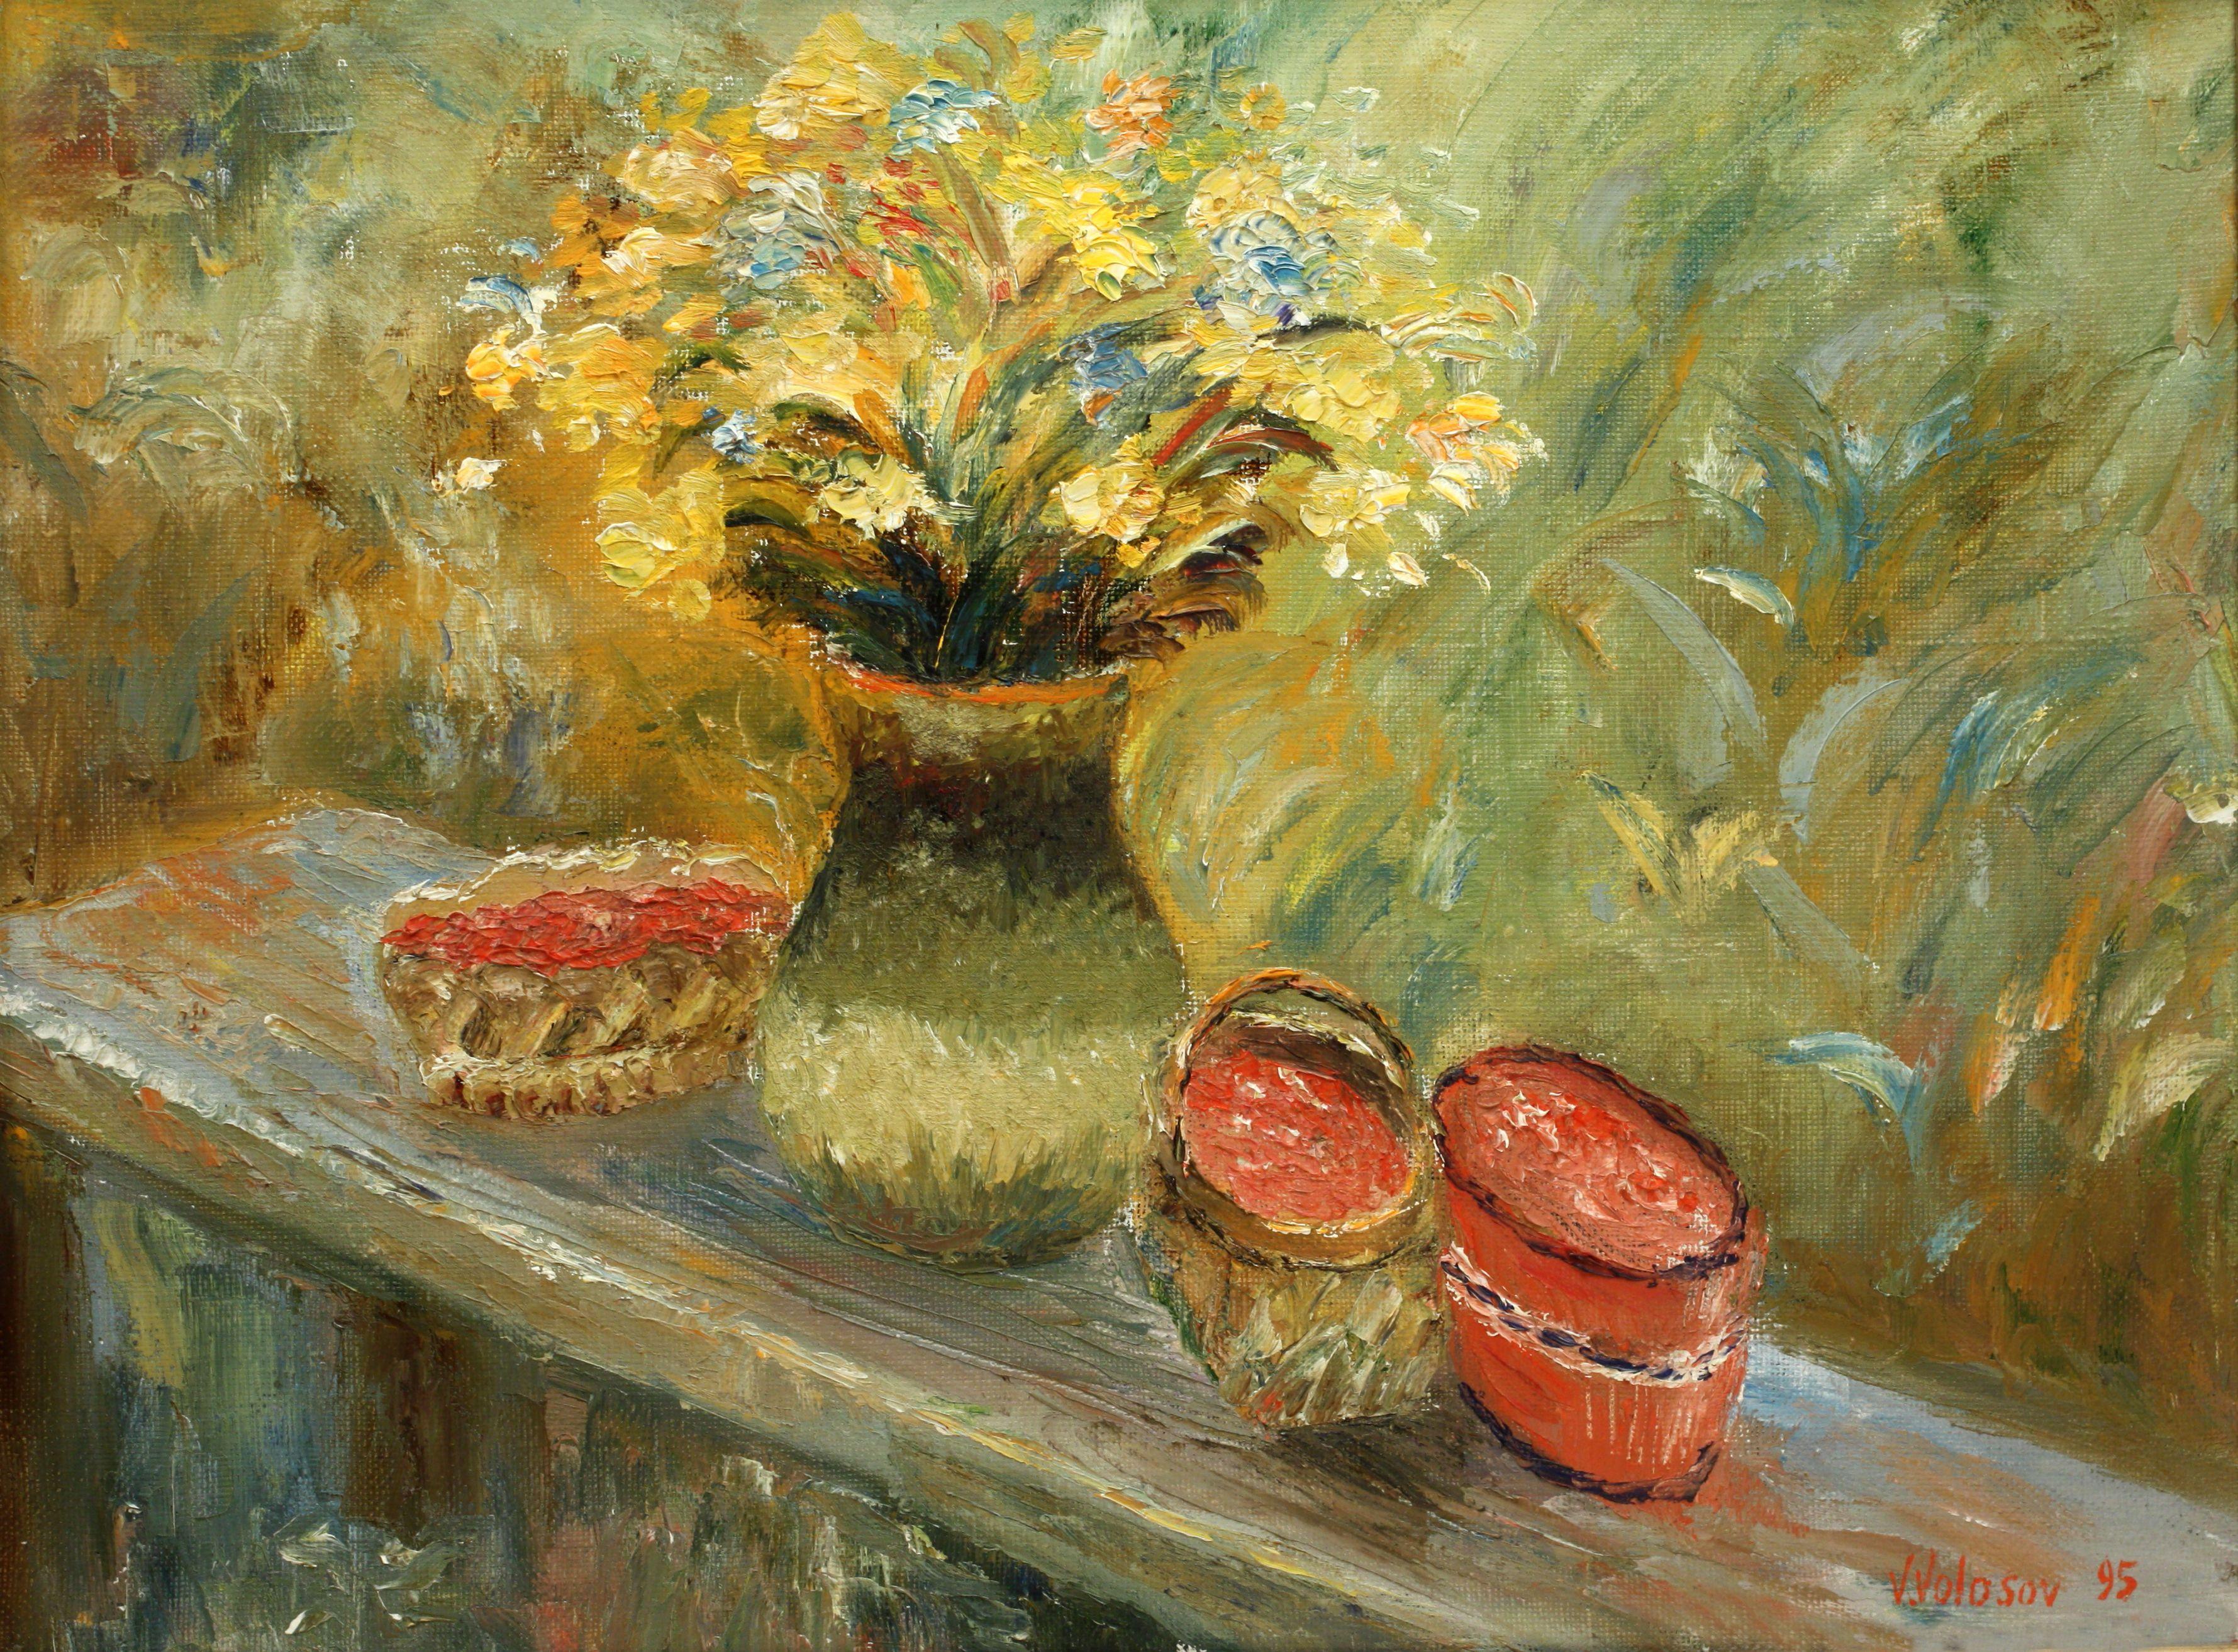   This is an original unique textured oil painting on stretched canvas. The painting was created using professional quality oil paints. Original Artist Style â€“ modern impressionist interpretation. Bright colors highlight the picture in the